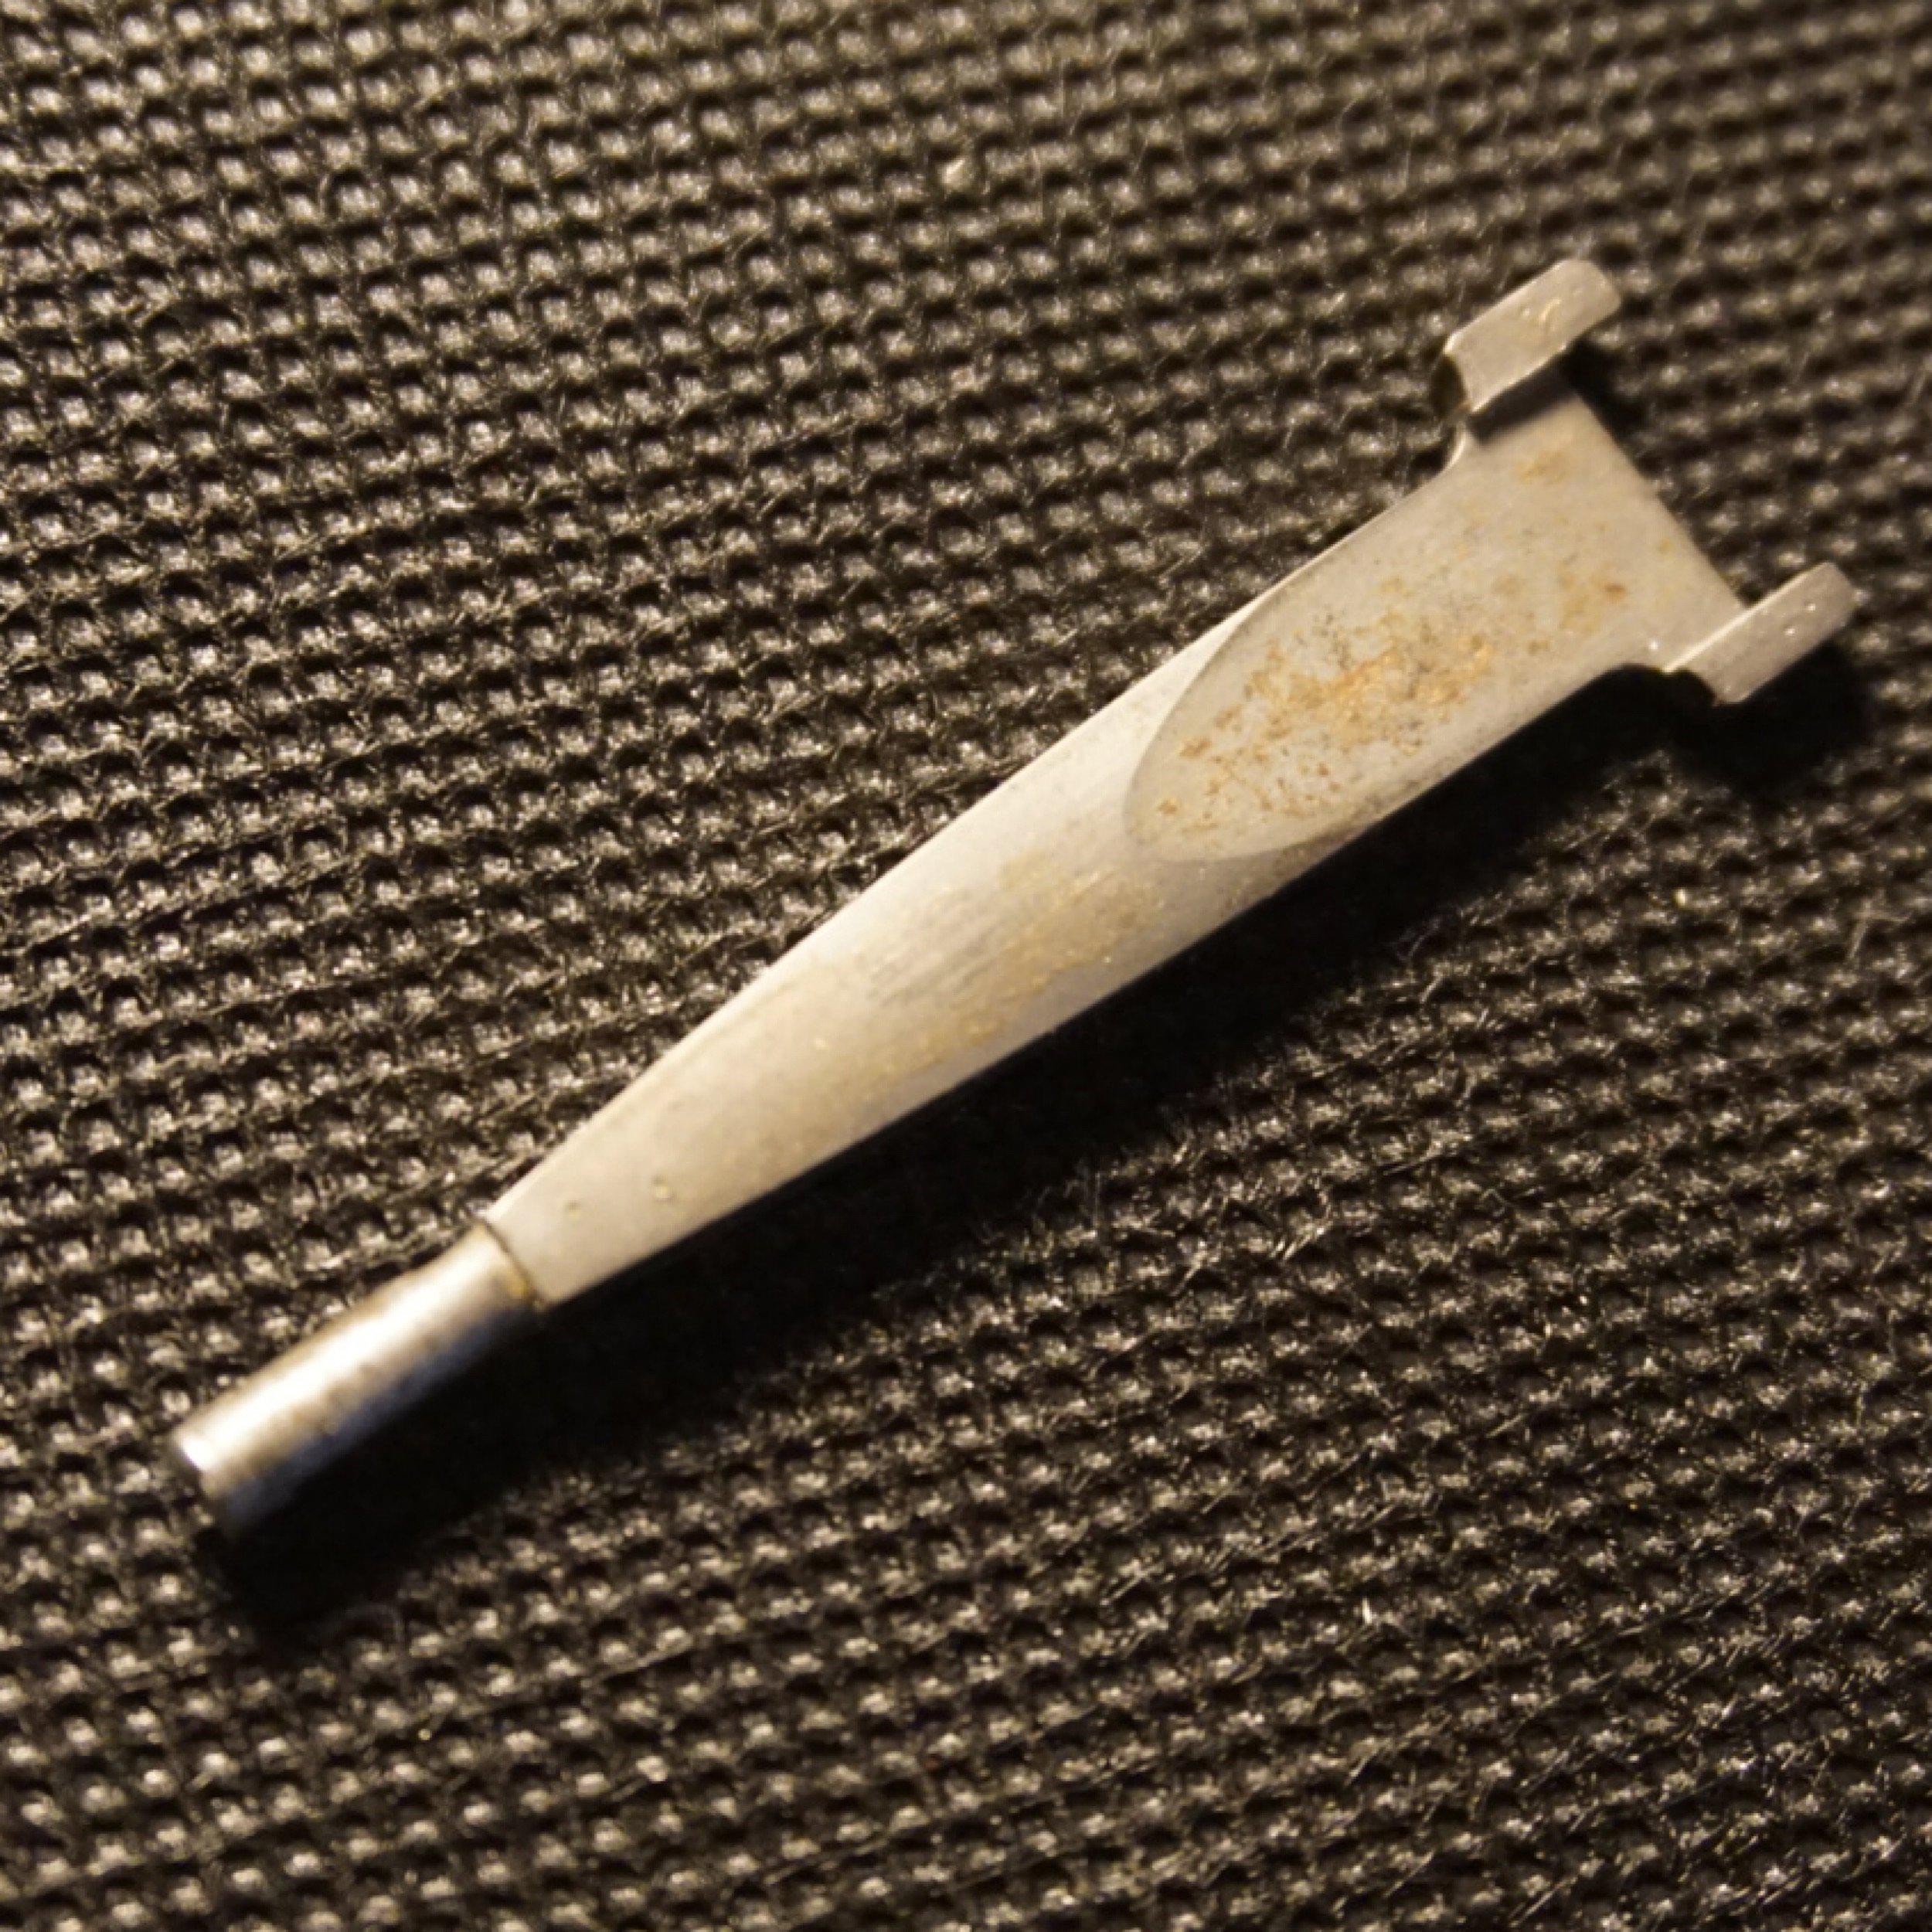 Brannen X oboe shaper tip to make Gouged shaped and folded oboe cane, ready to be made into the best oboe reeds